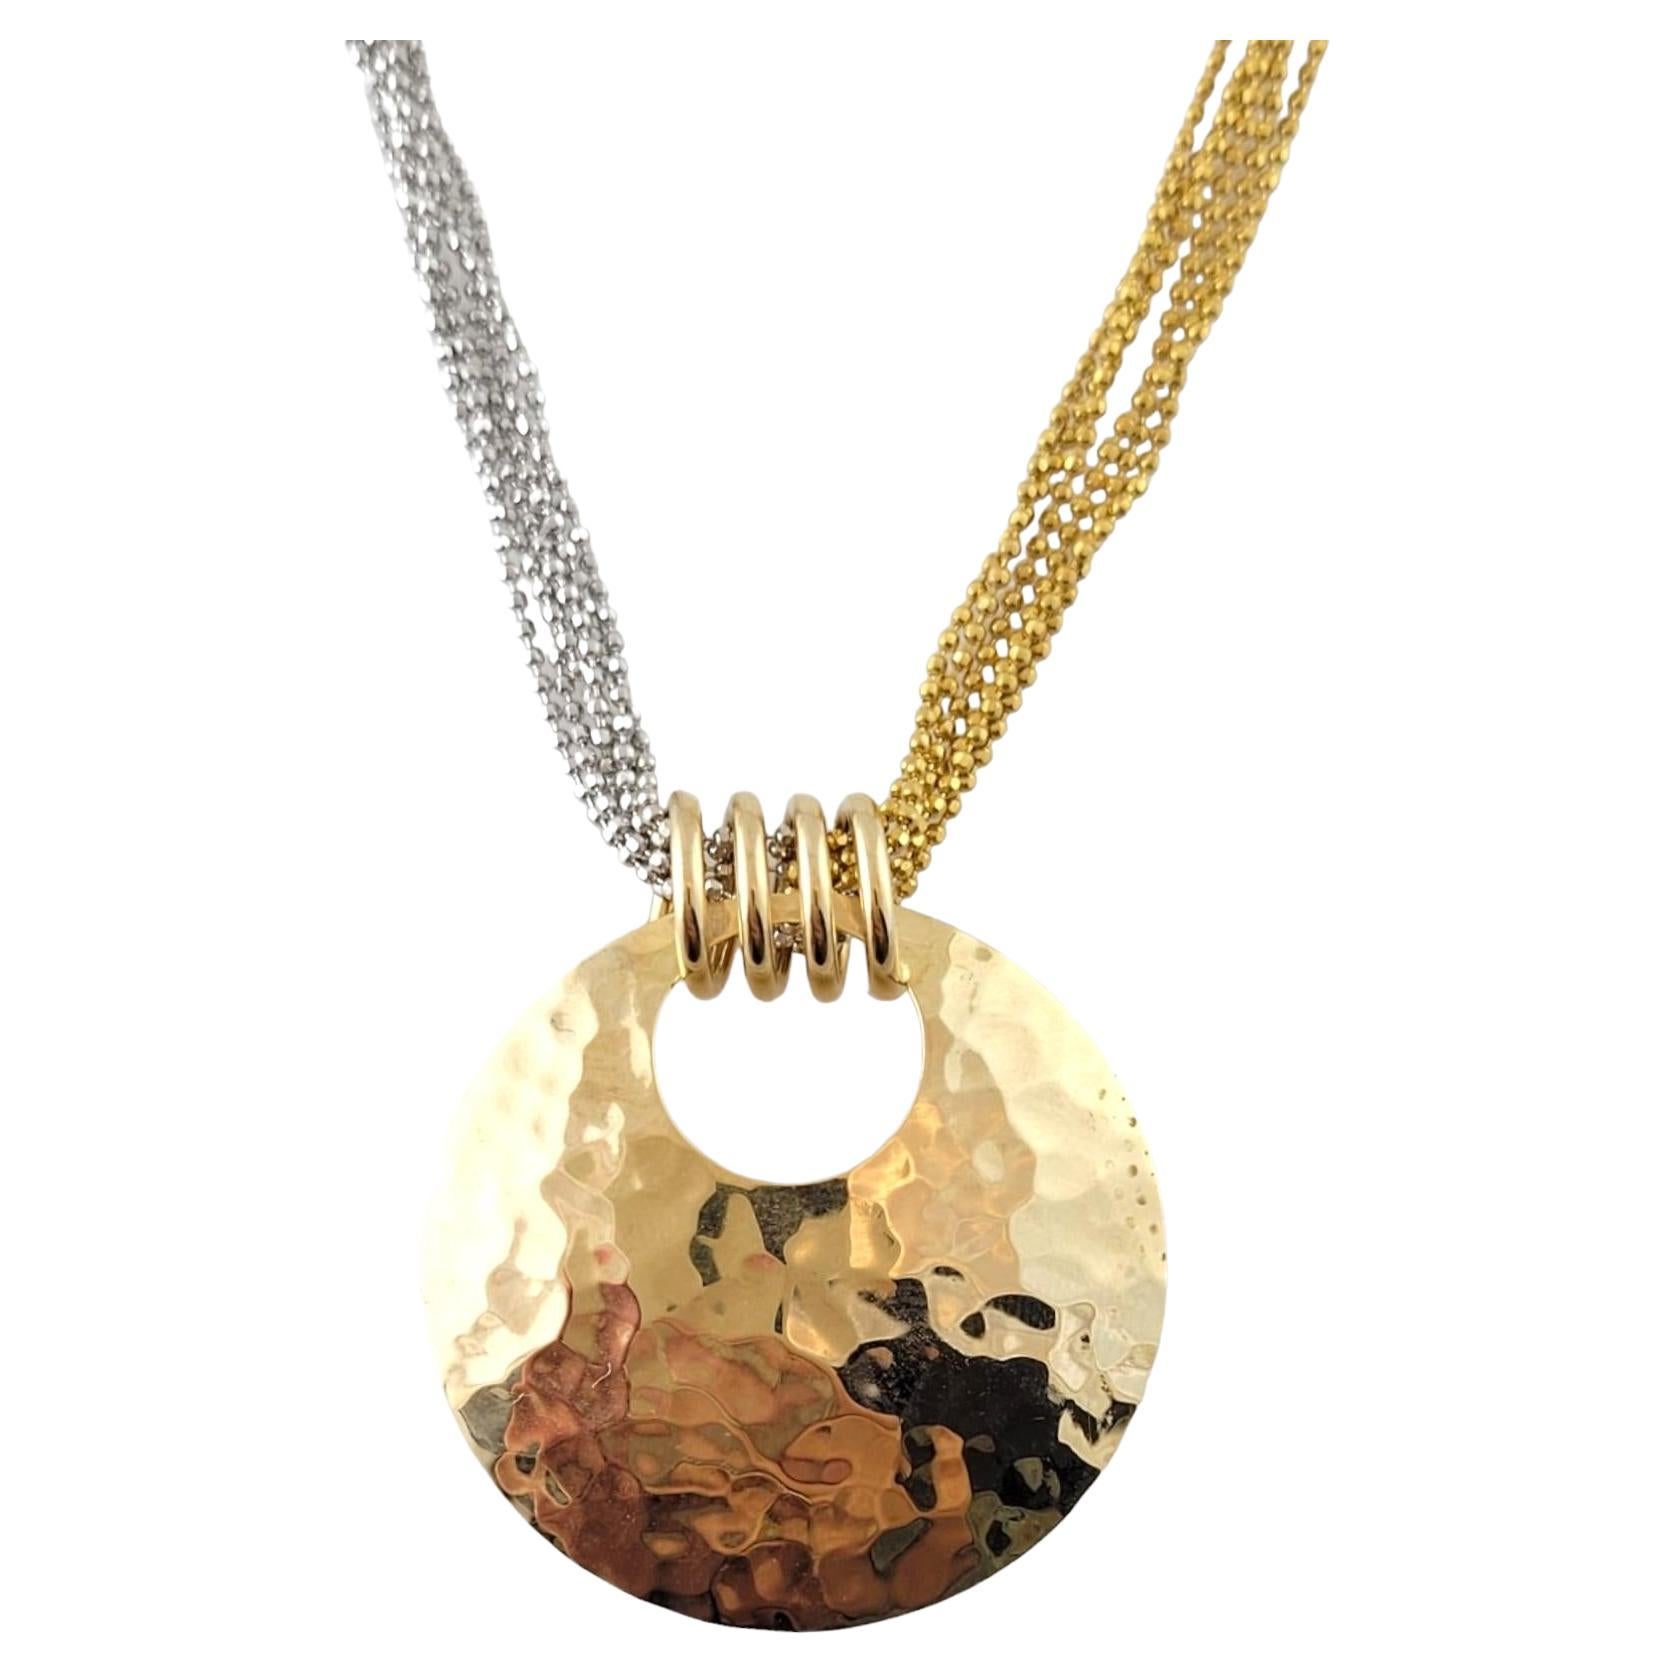 14K Yellow & White Gold Multi Chain Hammered Pendant Necklace 

This breathtaking necklace is crafted from multiple 14K yellow and white gold chains with a gorgeous, hammered pendant!

Chain length: 17